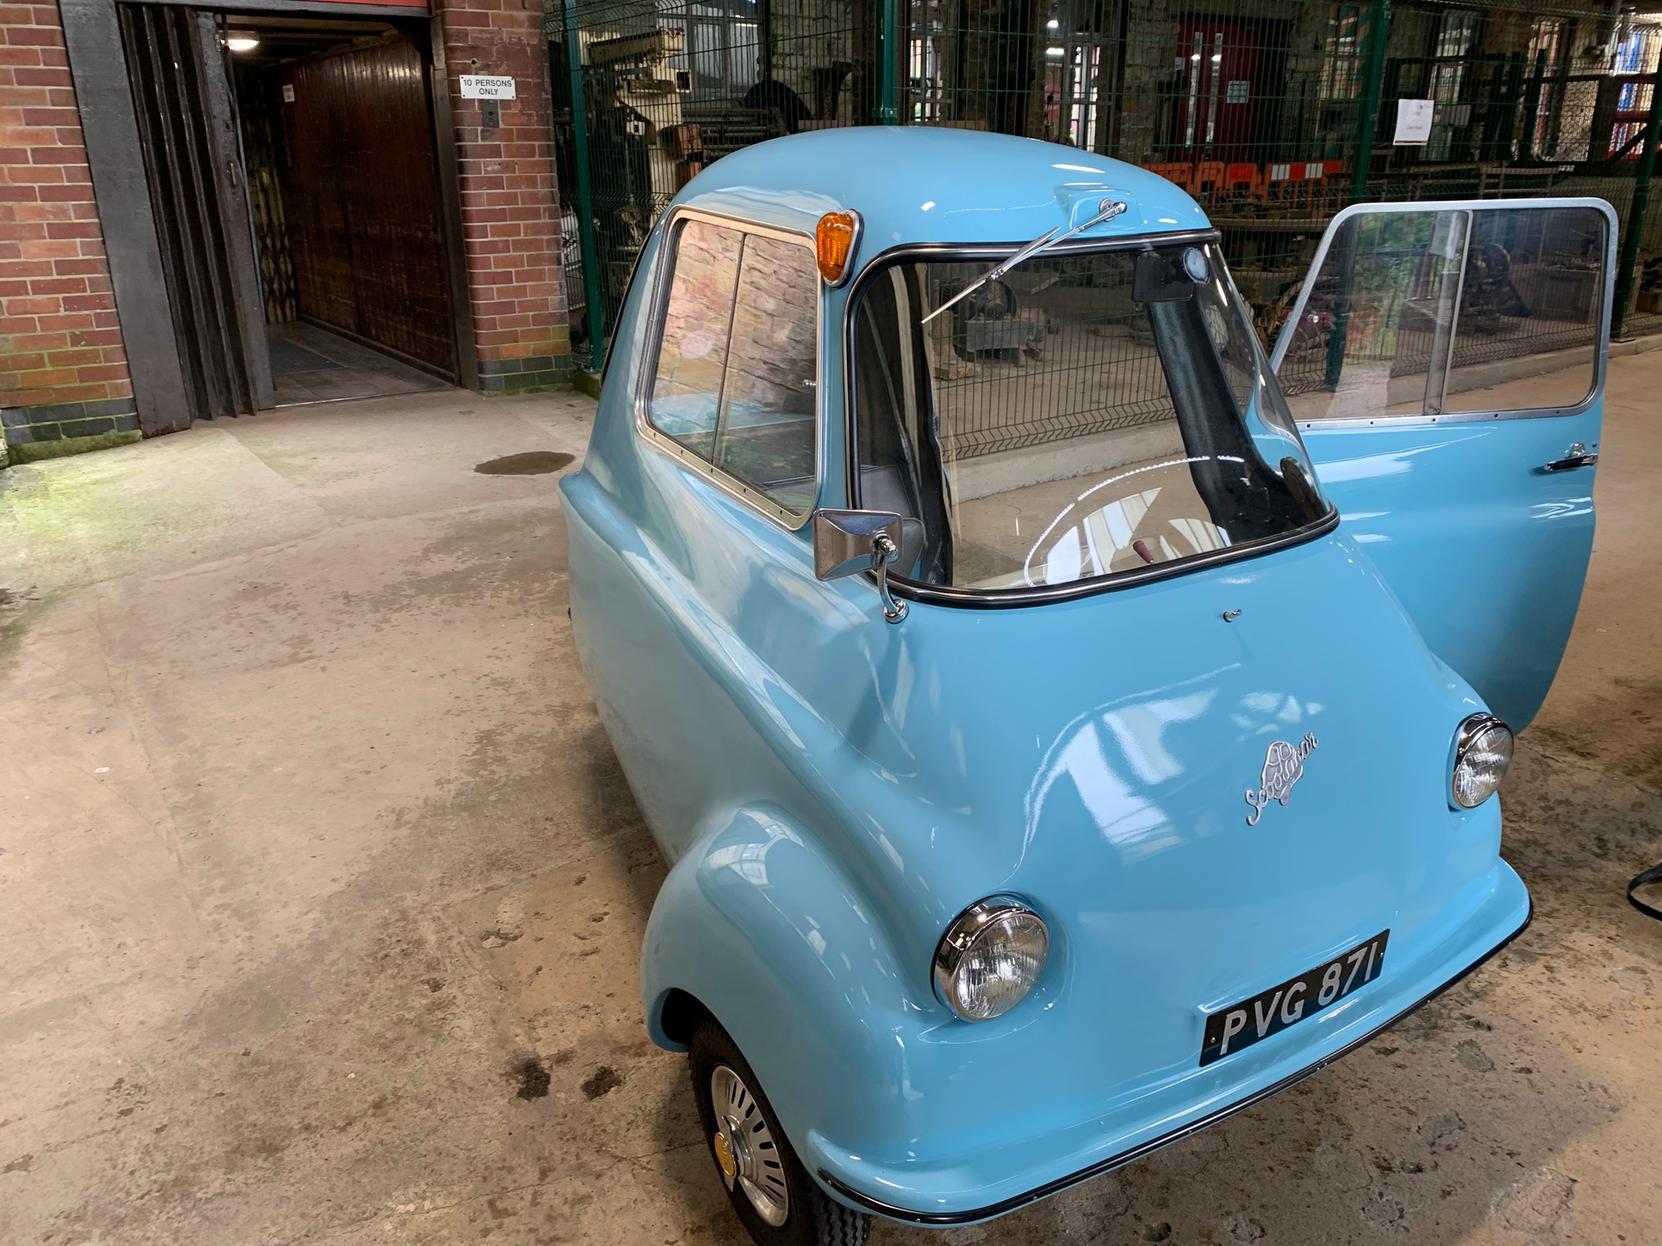 Manufactured in the late 1950s by Scootacars Ltd, a division of railway locomotive builder, the Hunslet Engine Co. Said to have been inspired by the wife of one of the company directors, who wanted a car easier to park than her Jag